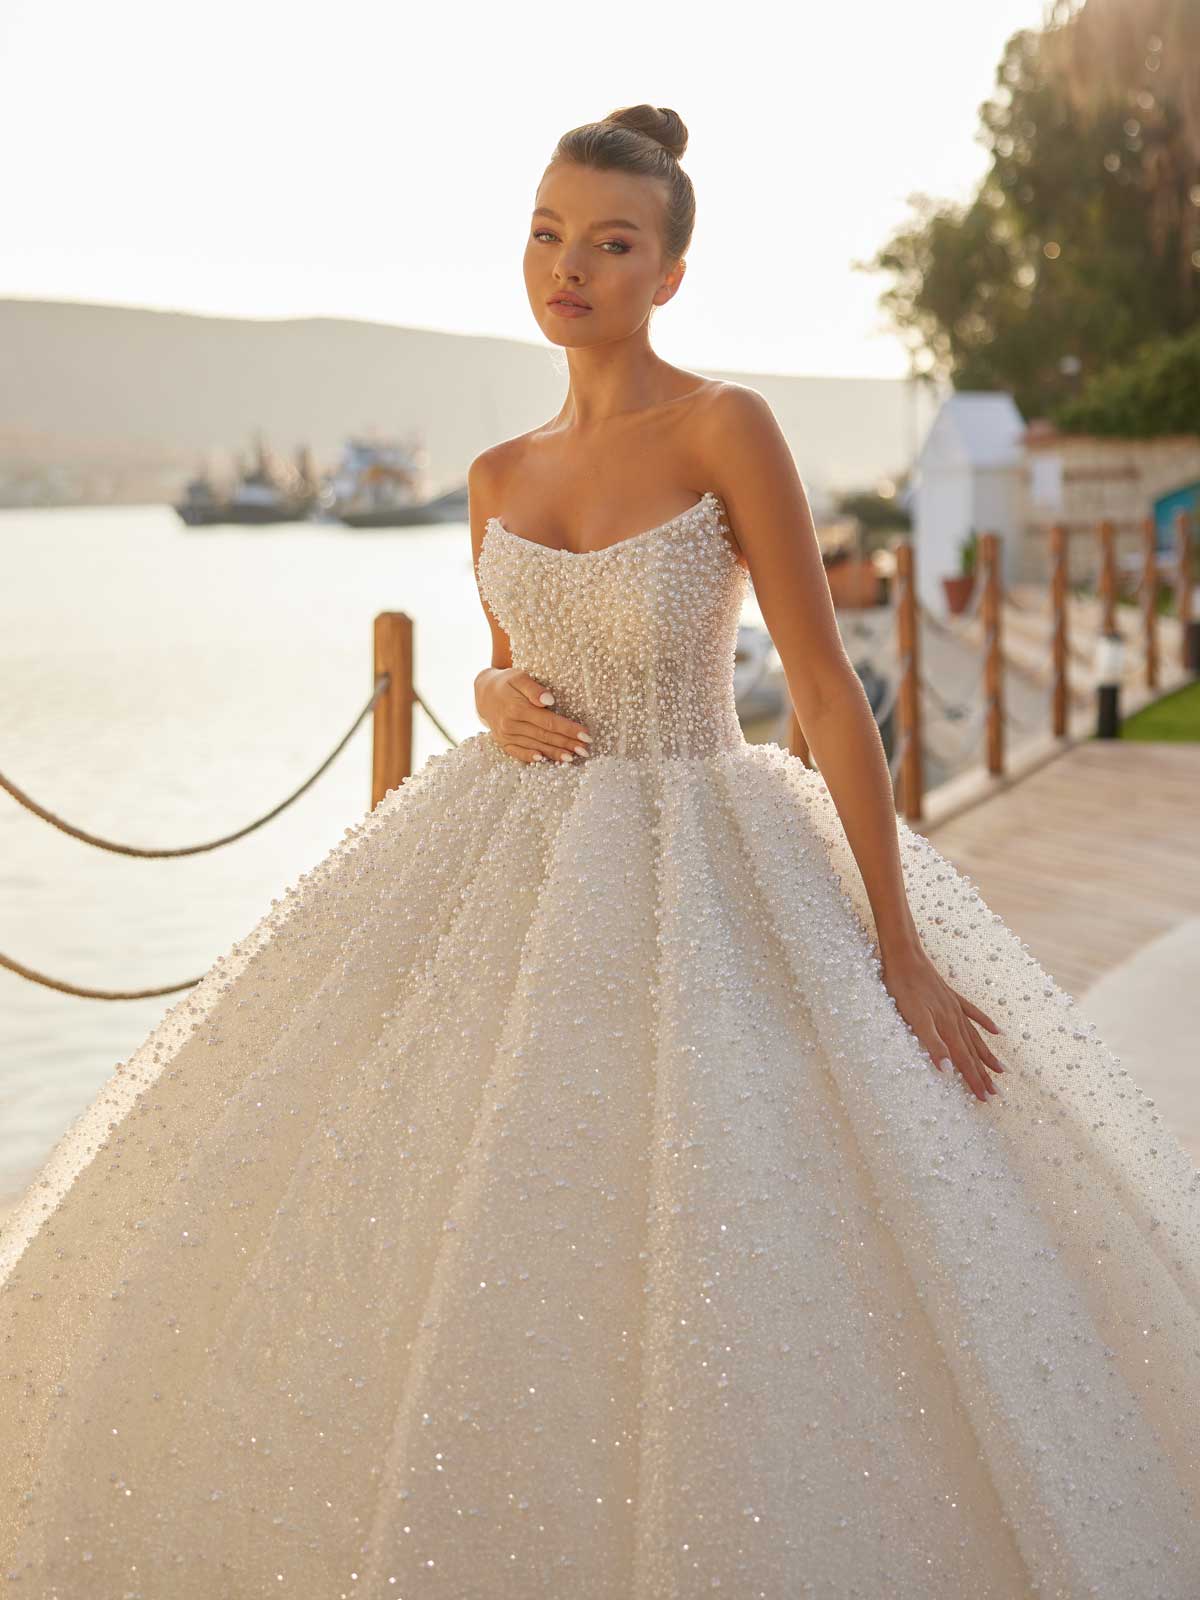 buy strapless simple yet elegant pearl embellished wedding ball gown online bridal gowns botuqiue